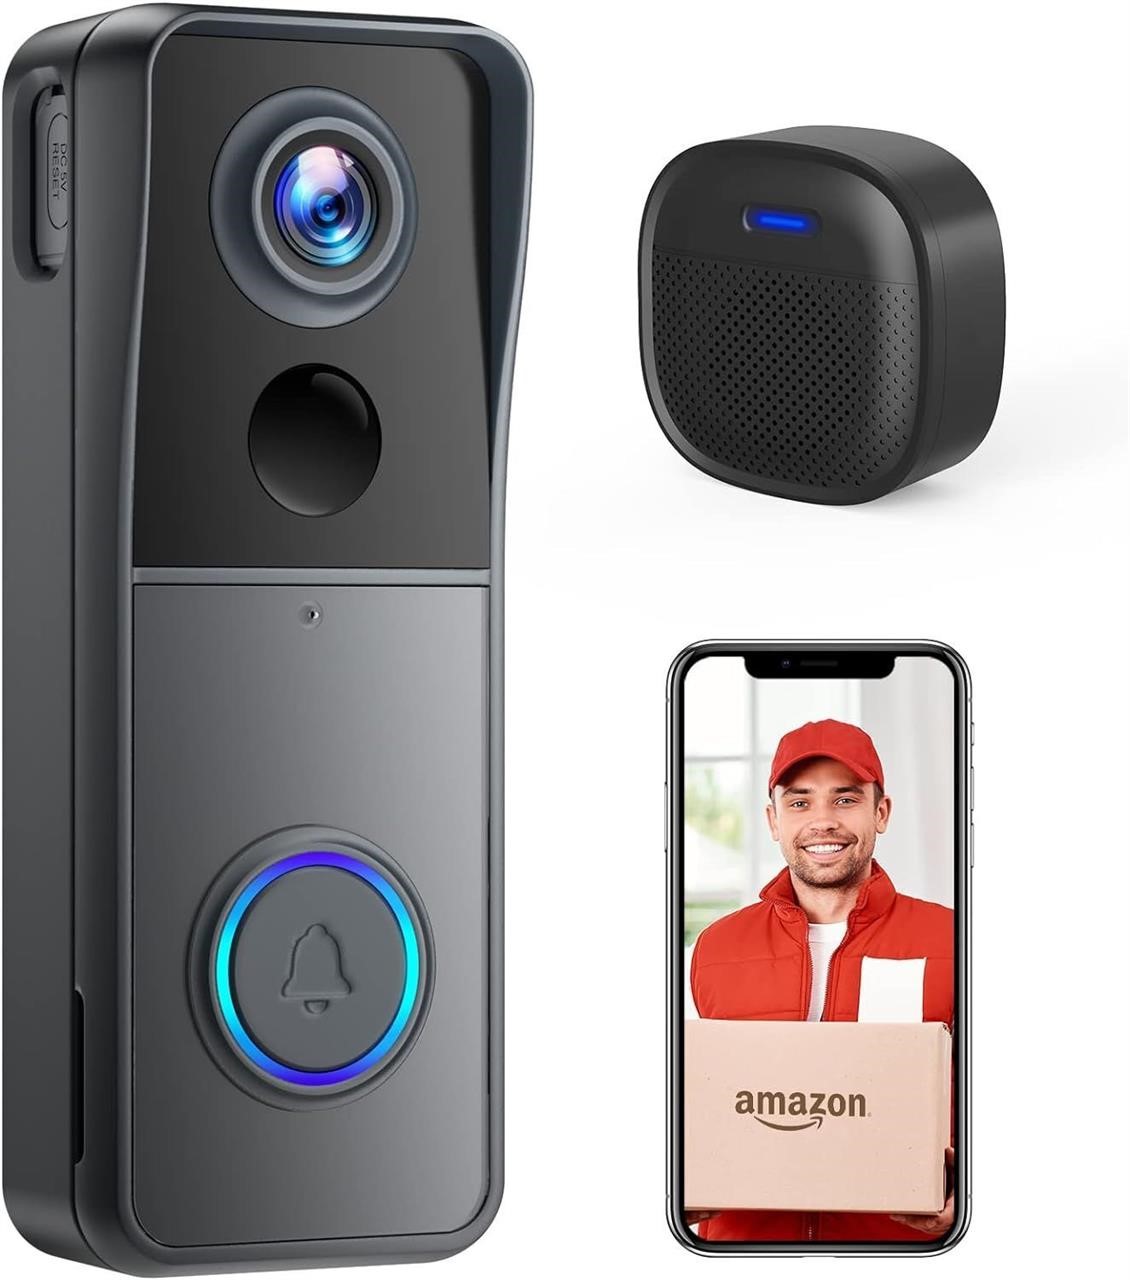 Wireless Doorbell Camera with Chime